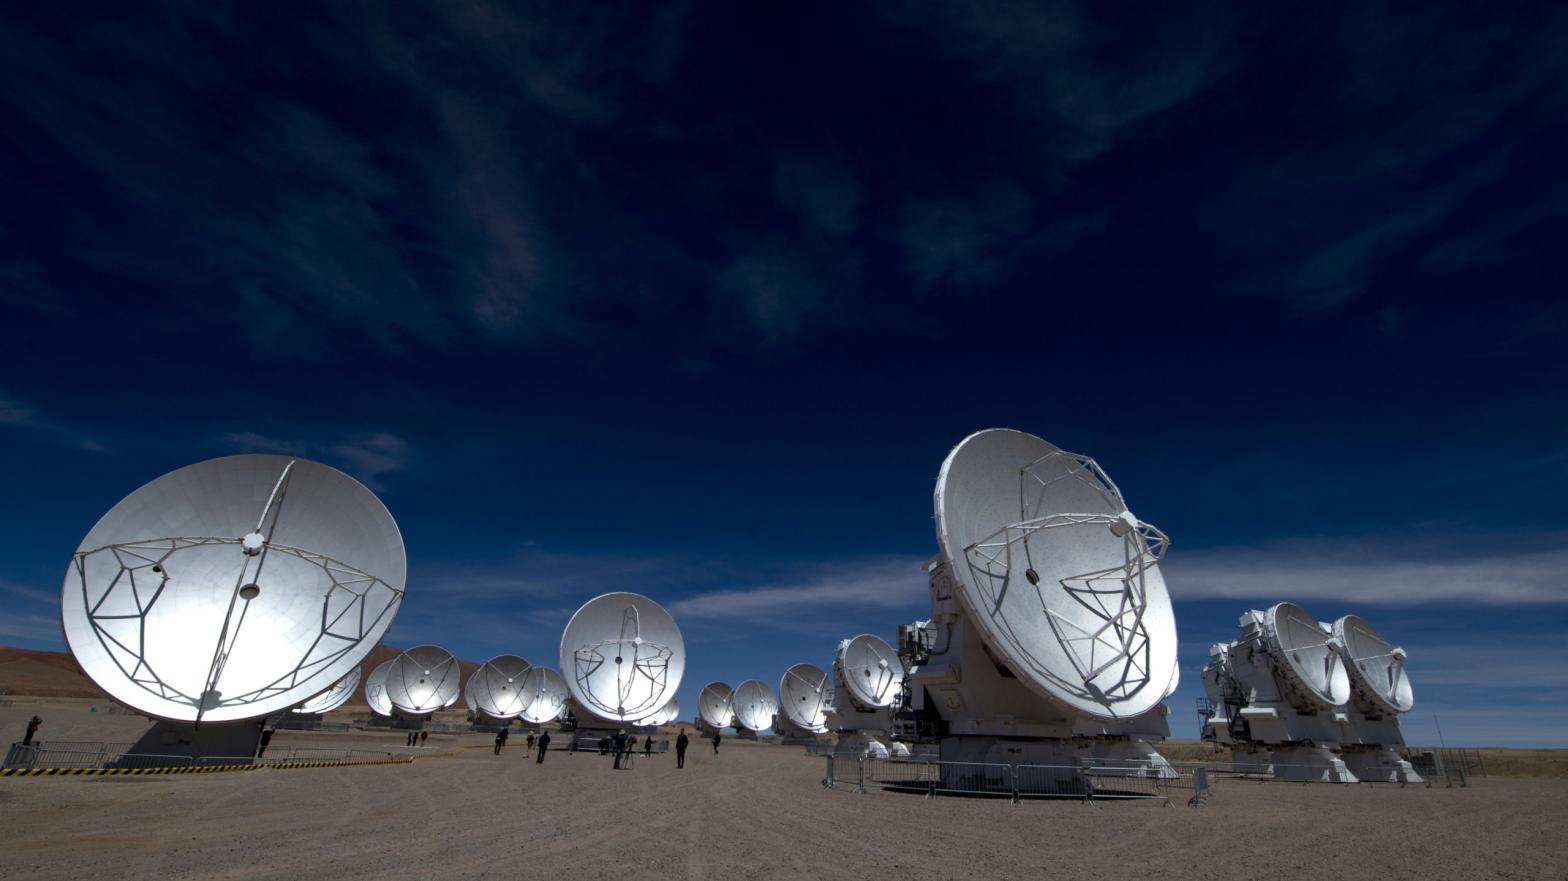 The ALMA telescope sits high in Chile's Atacama Desert. (Photo: MARTIN BERNETTI/AFP via Getty Images, Getty Images)